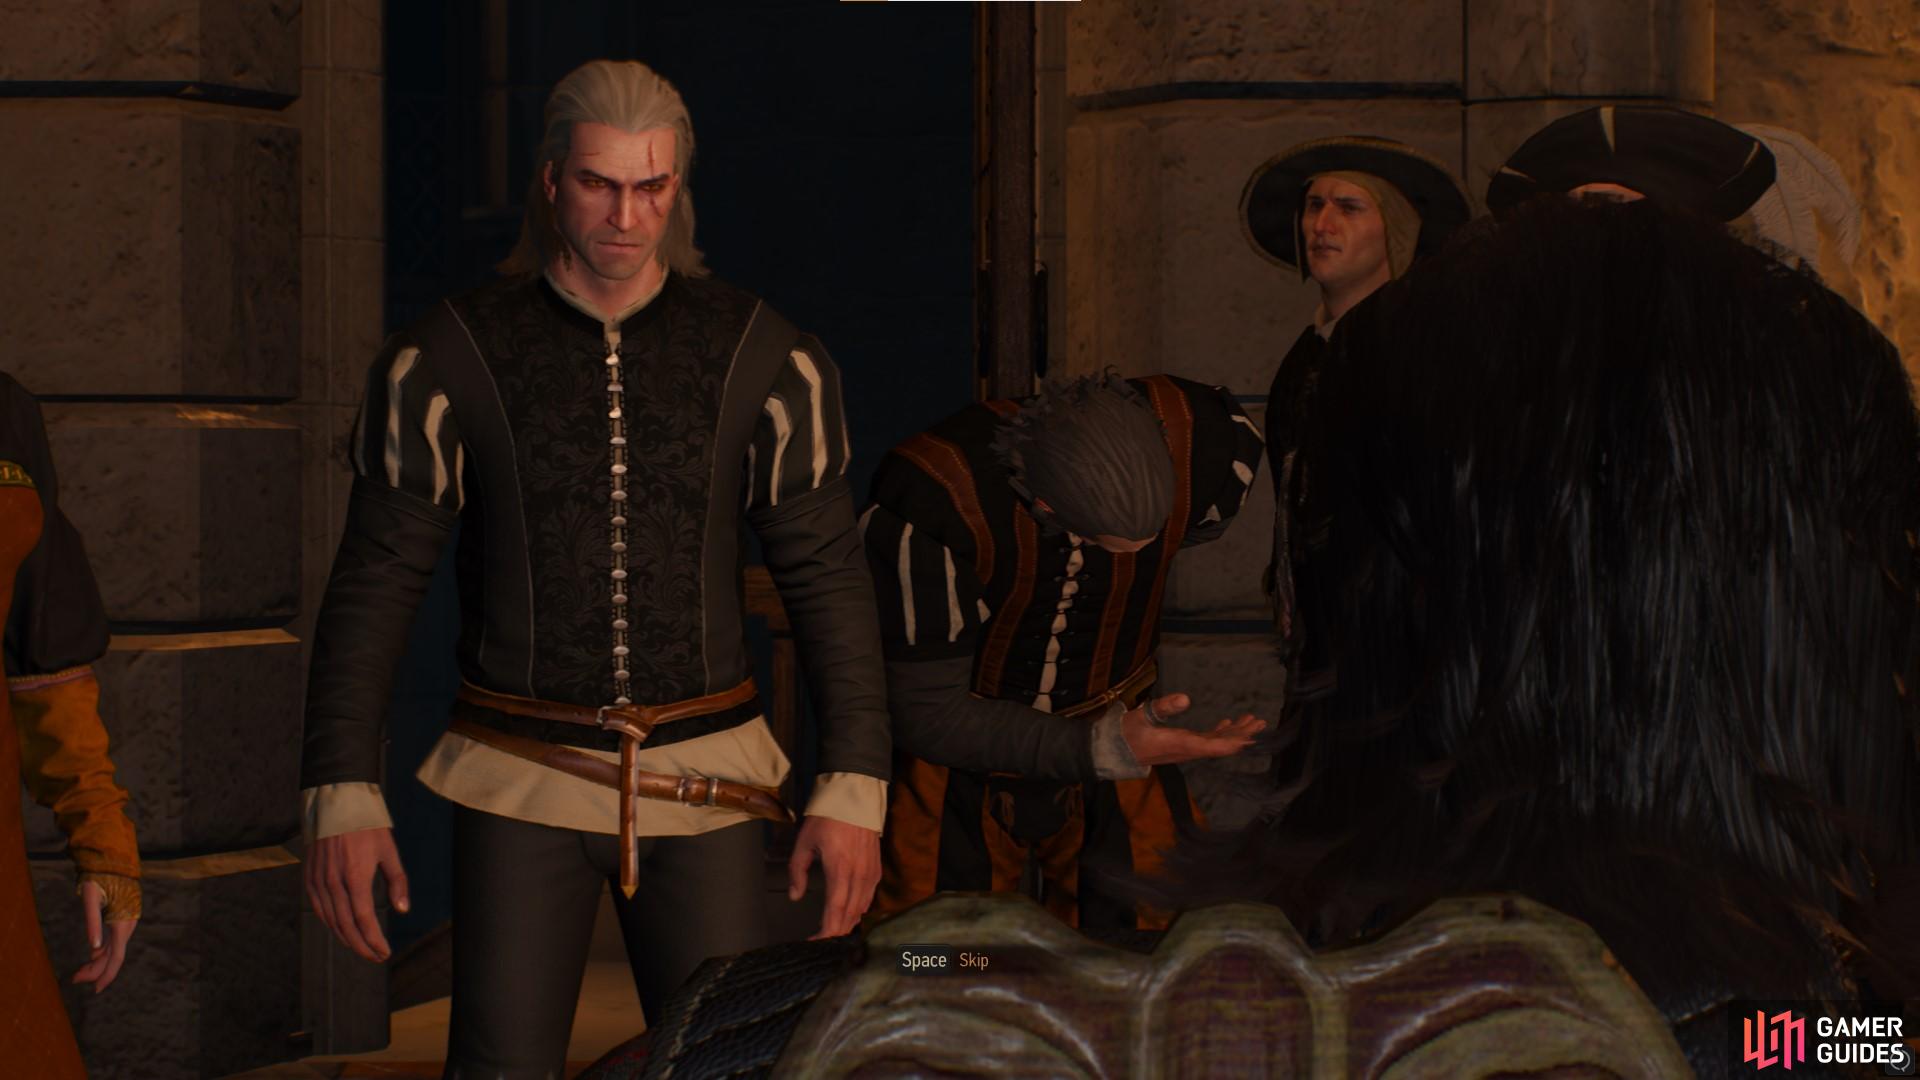 We answer whether you should bow or not in the Witcher 3, and what happens with both choices.